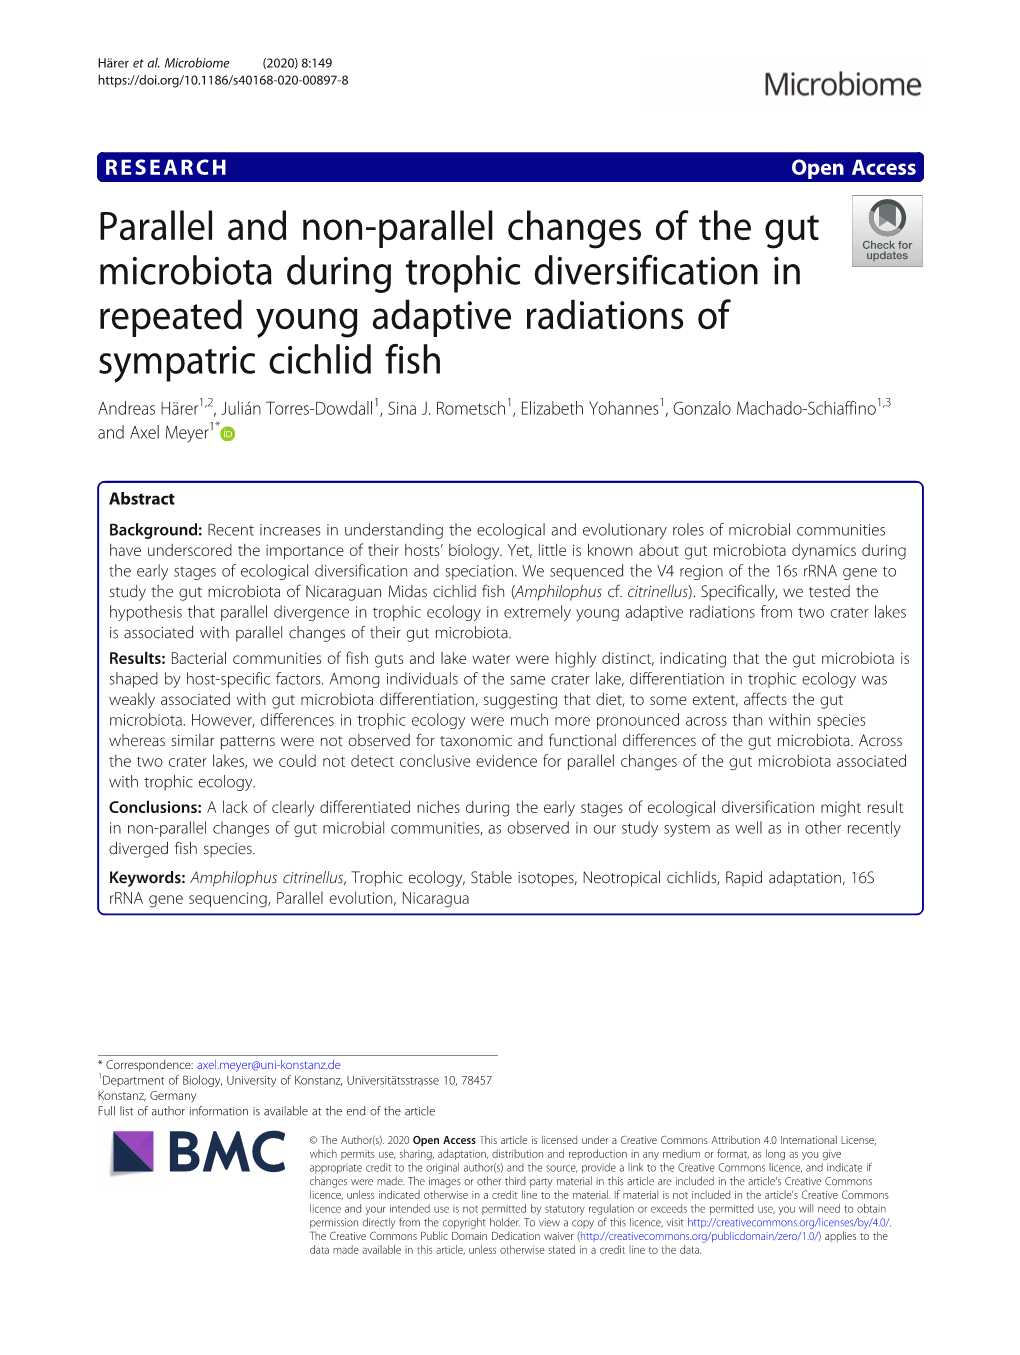 Parallel and Non-Parallel Changes of the Gut Microbiota During Trophic